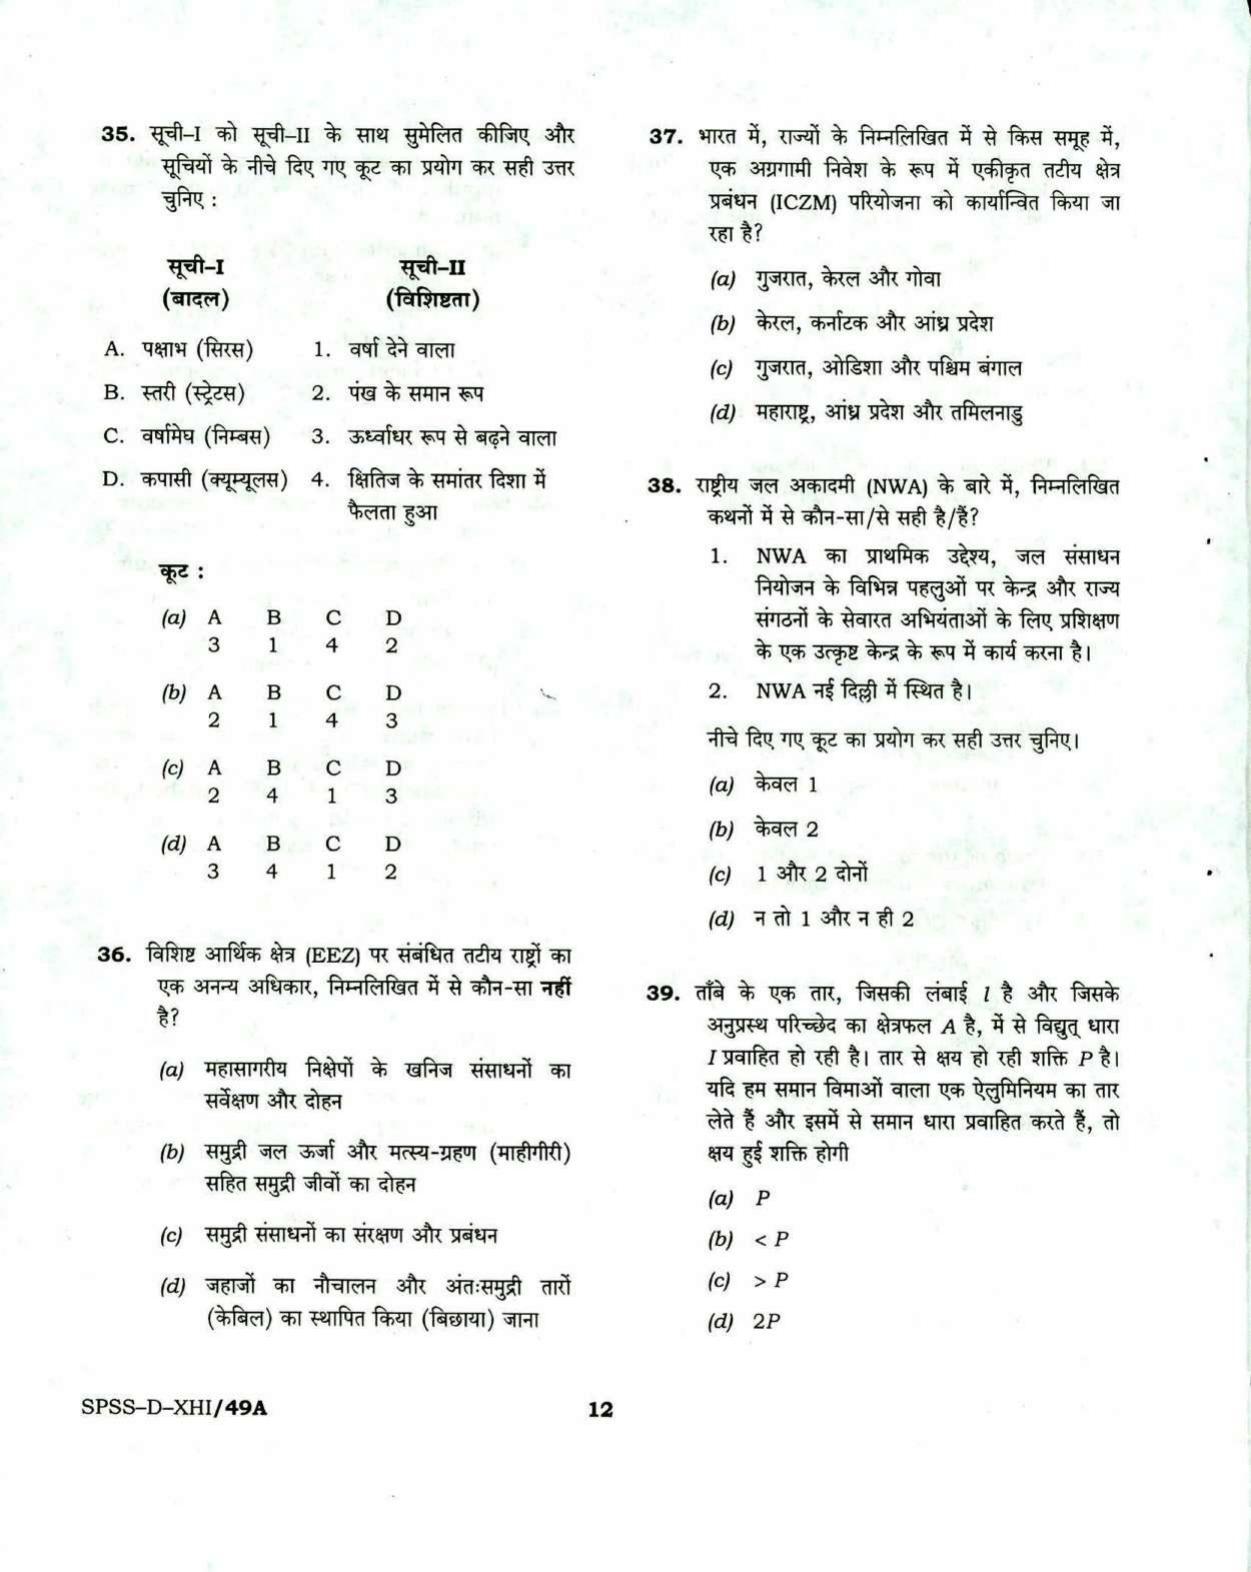 PBSSD General Knowledge Solved Papers - Page 12